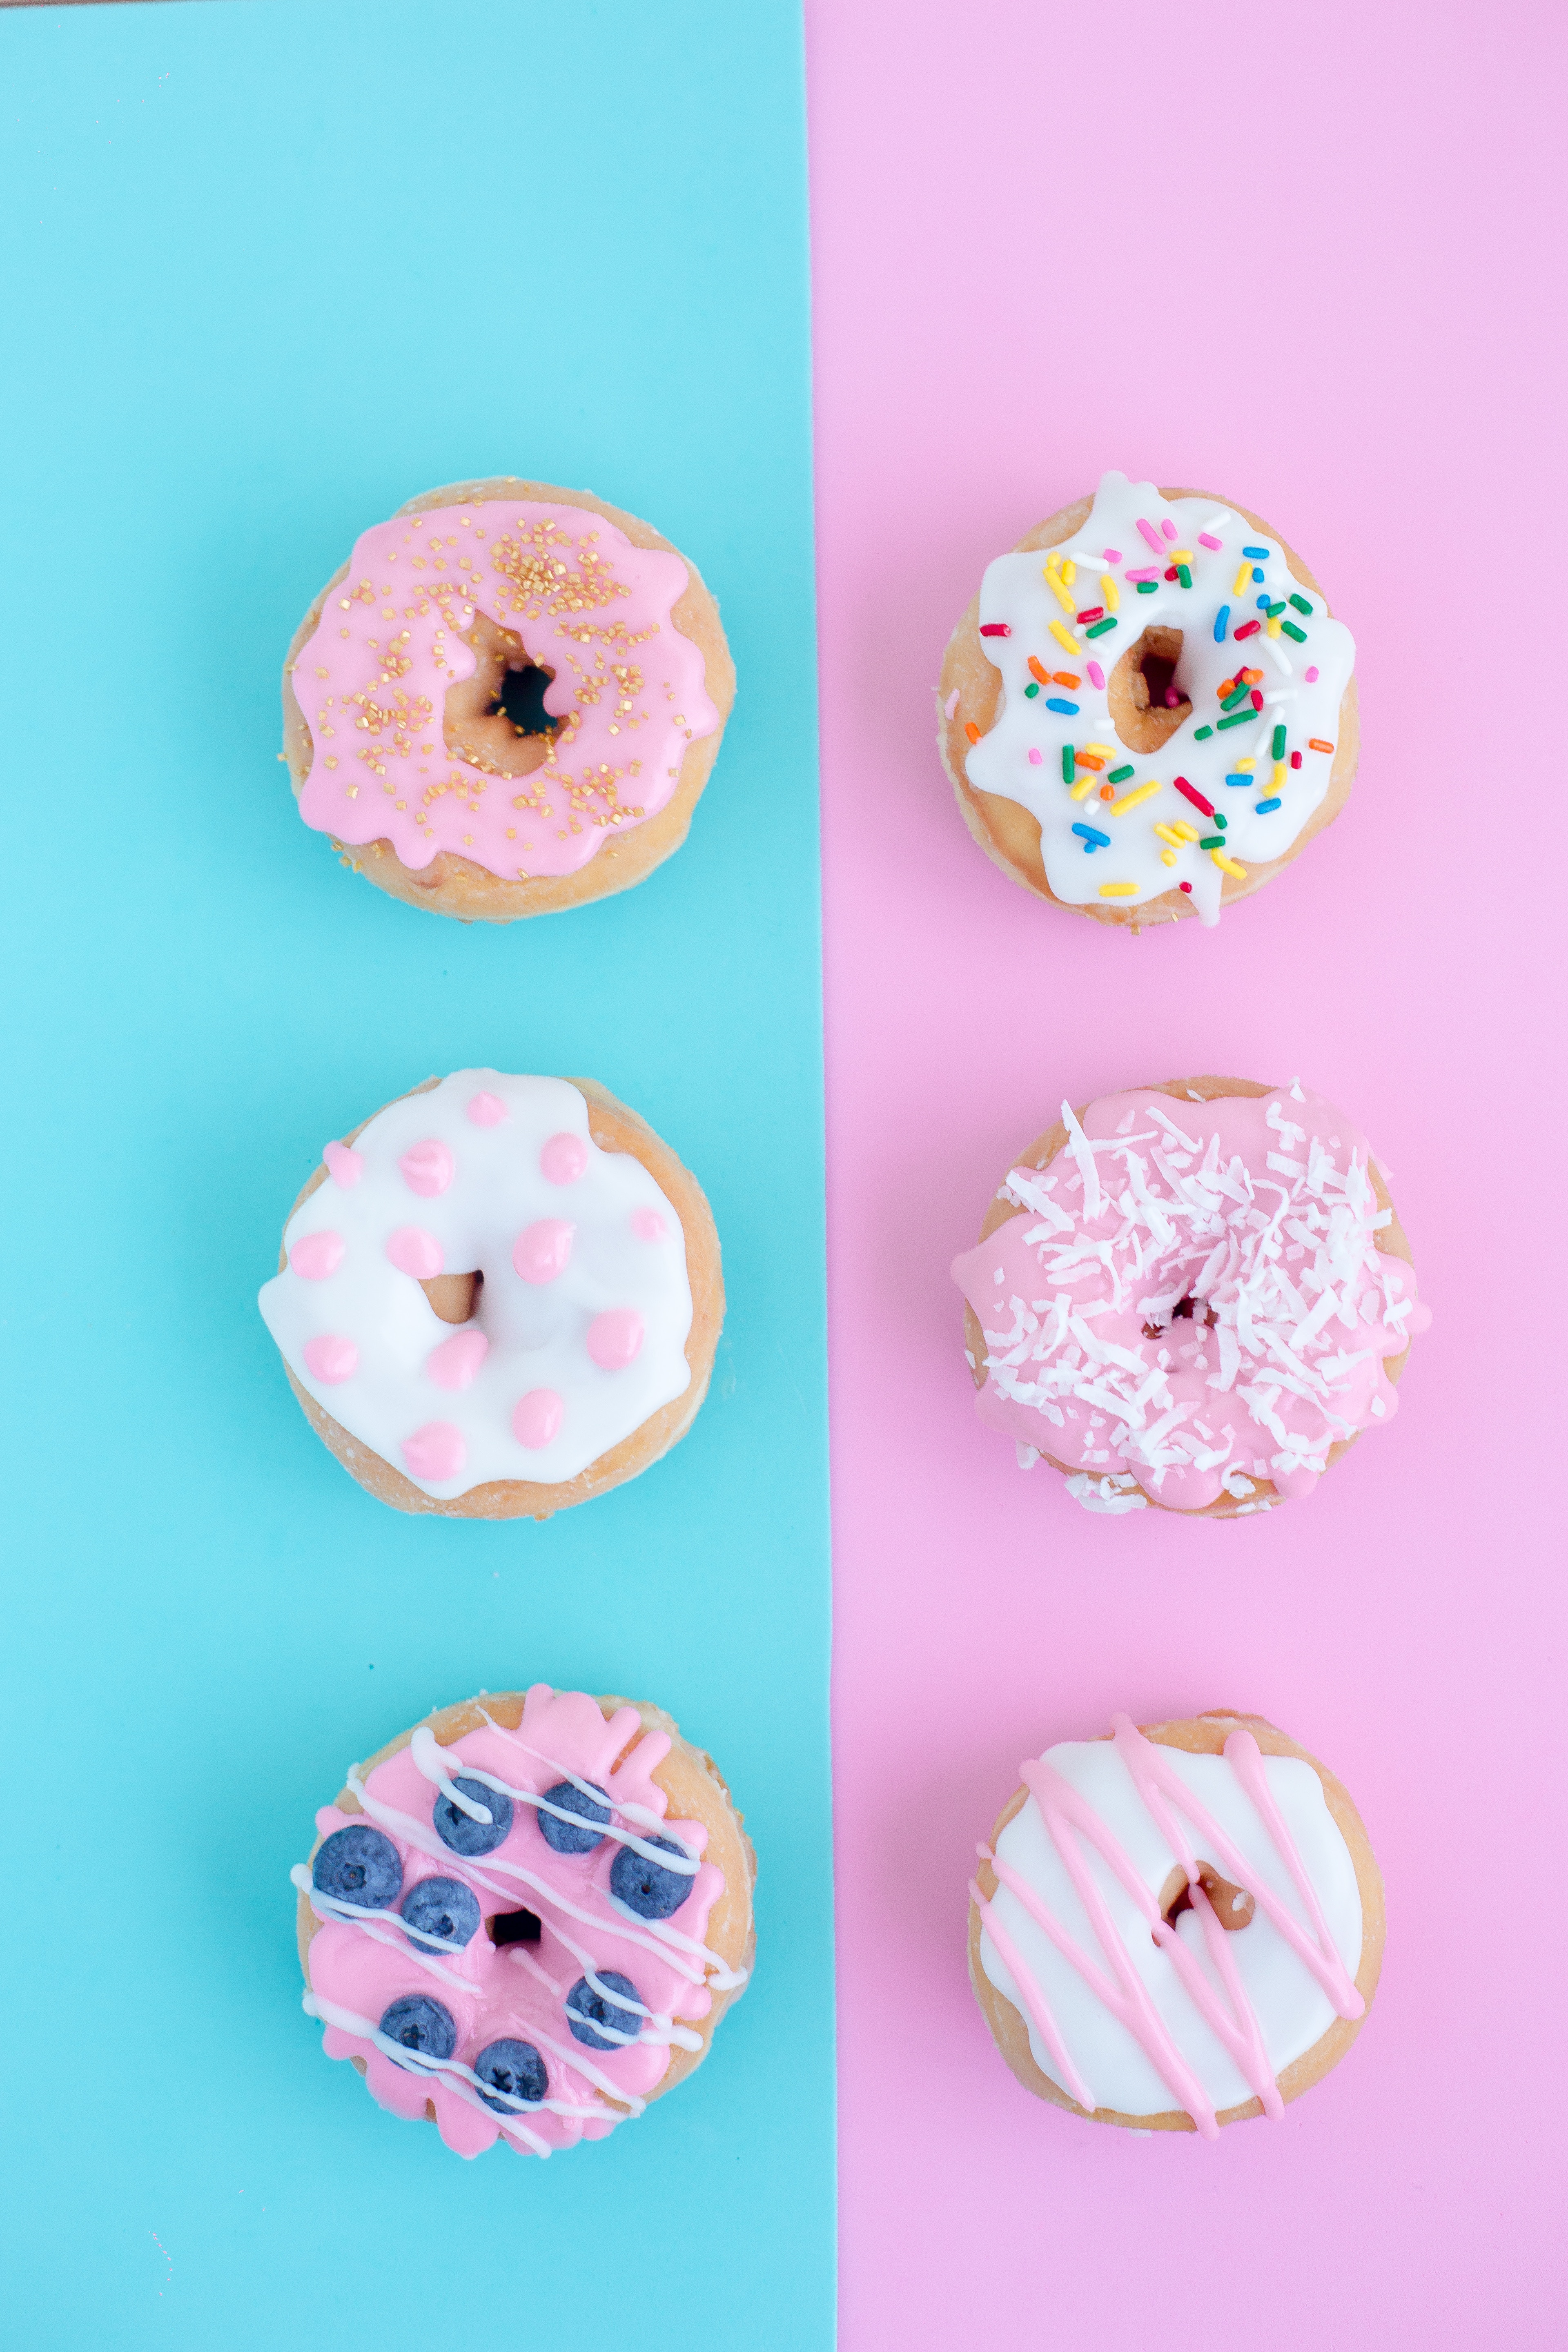 Doughnuts on turquoise and pink backgrounds